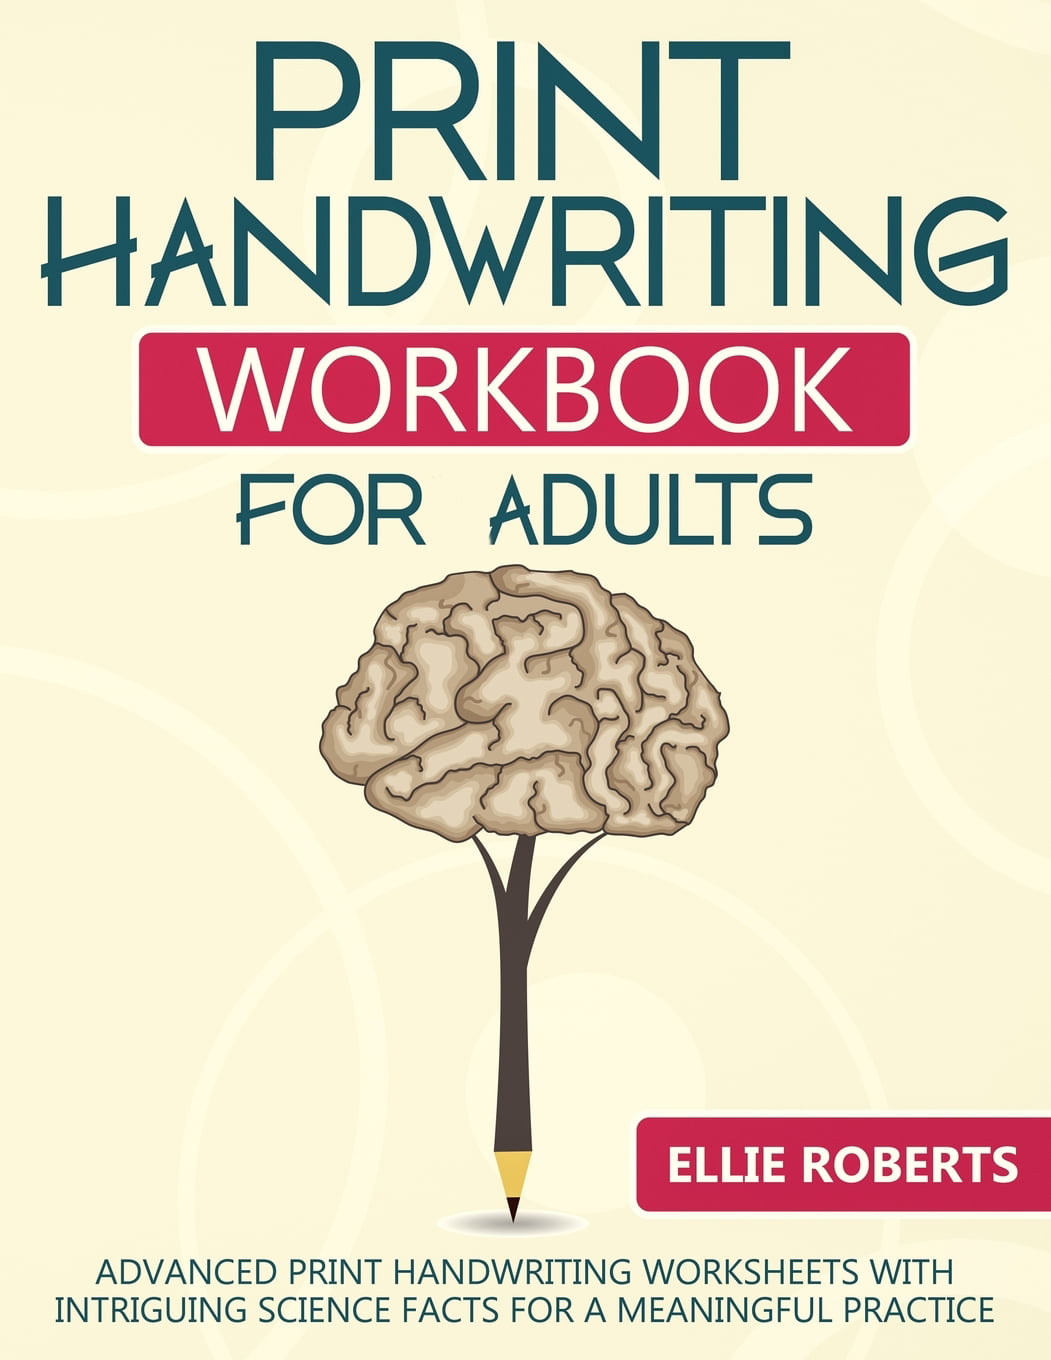 print handwriting workbook for adults advanced print handwriting worksheets with intriguing science facts for a meaningful practice paperback walmart com